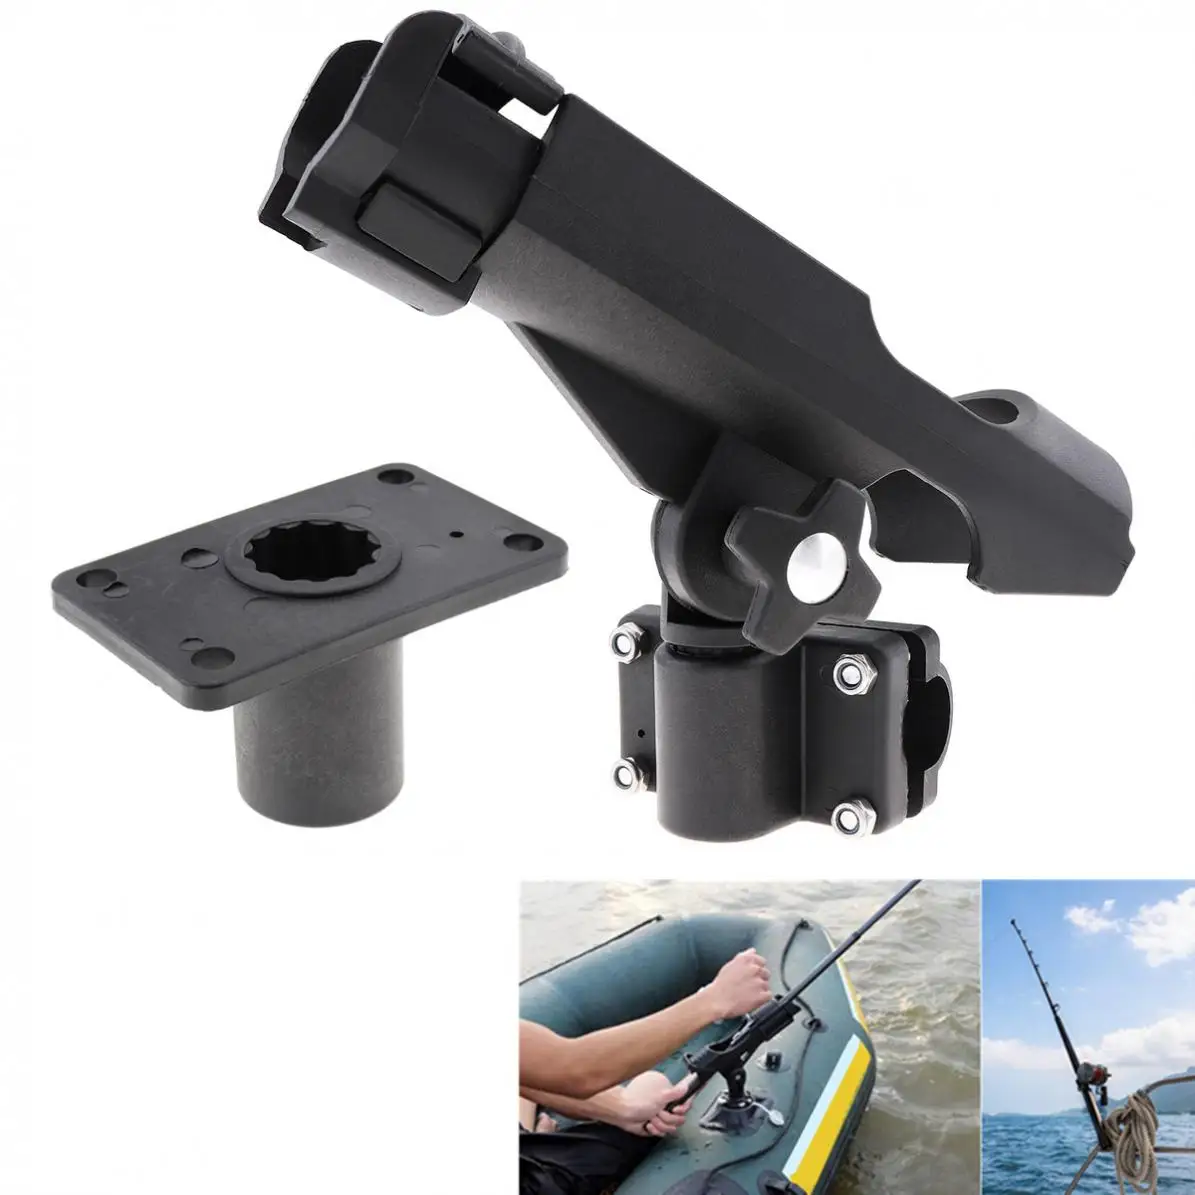 

Fishing Support Rod Stand Bracket Yacht Fishing Tackle Tool 360 Degrees Rotatable Rod Holder for Kayak and Boat Canoe